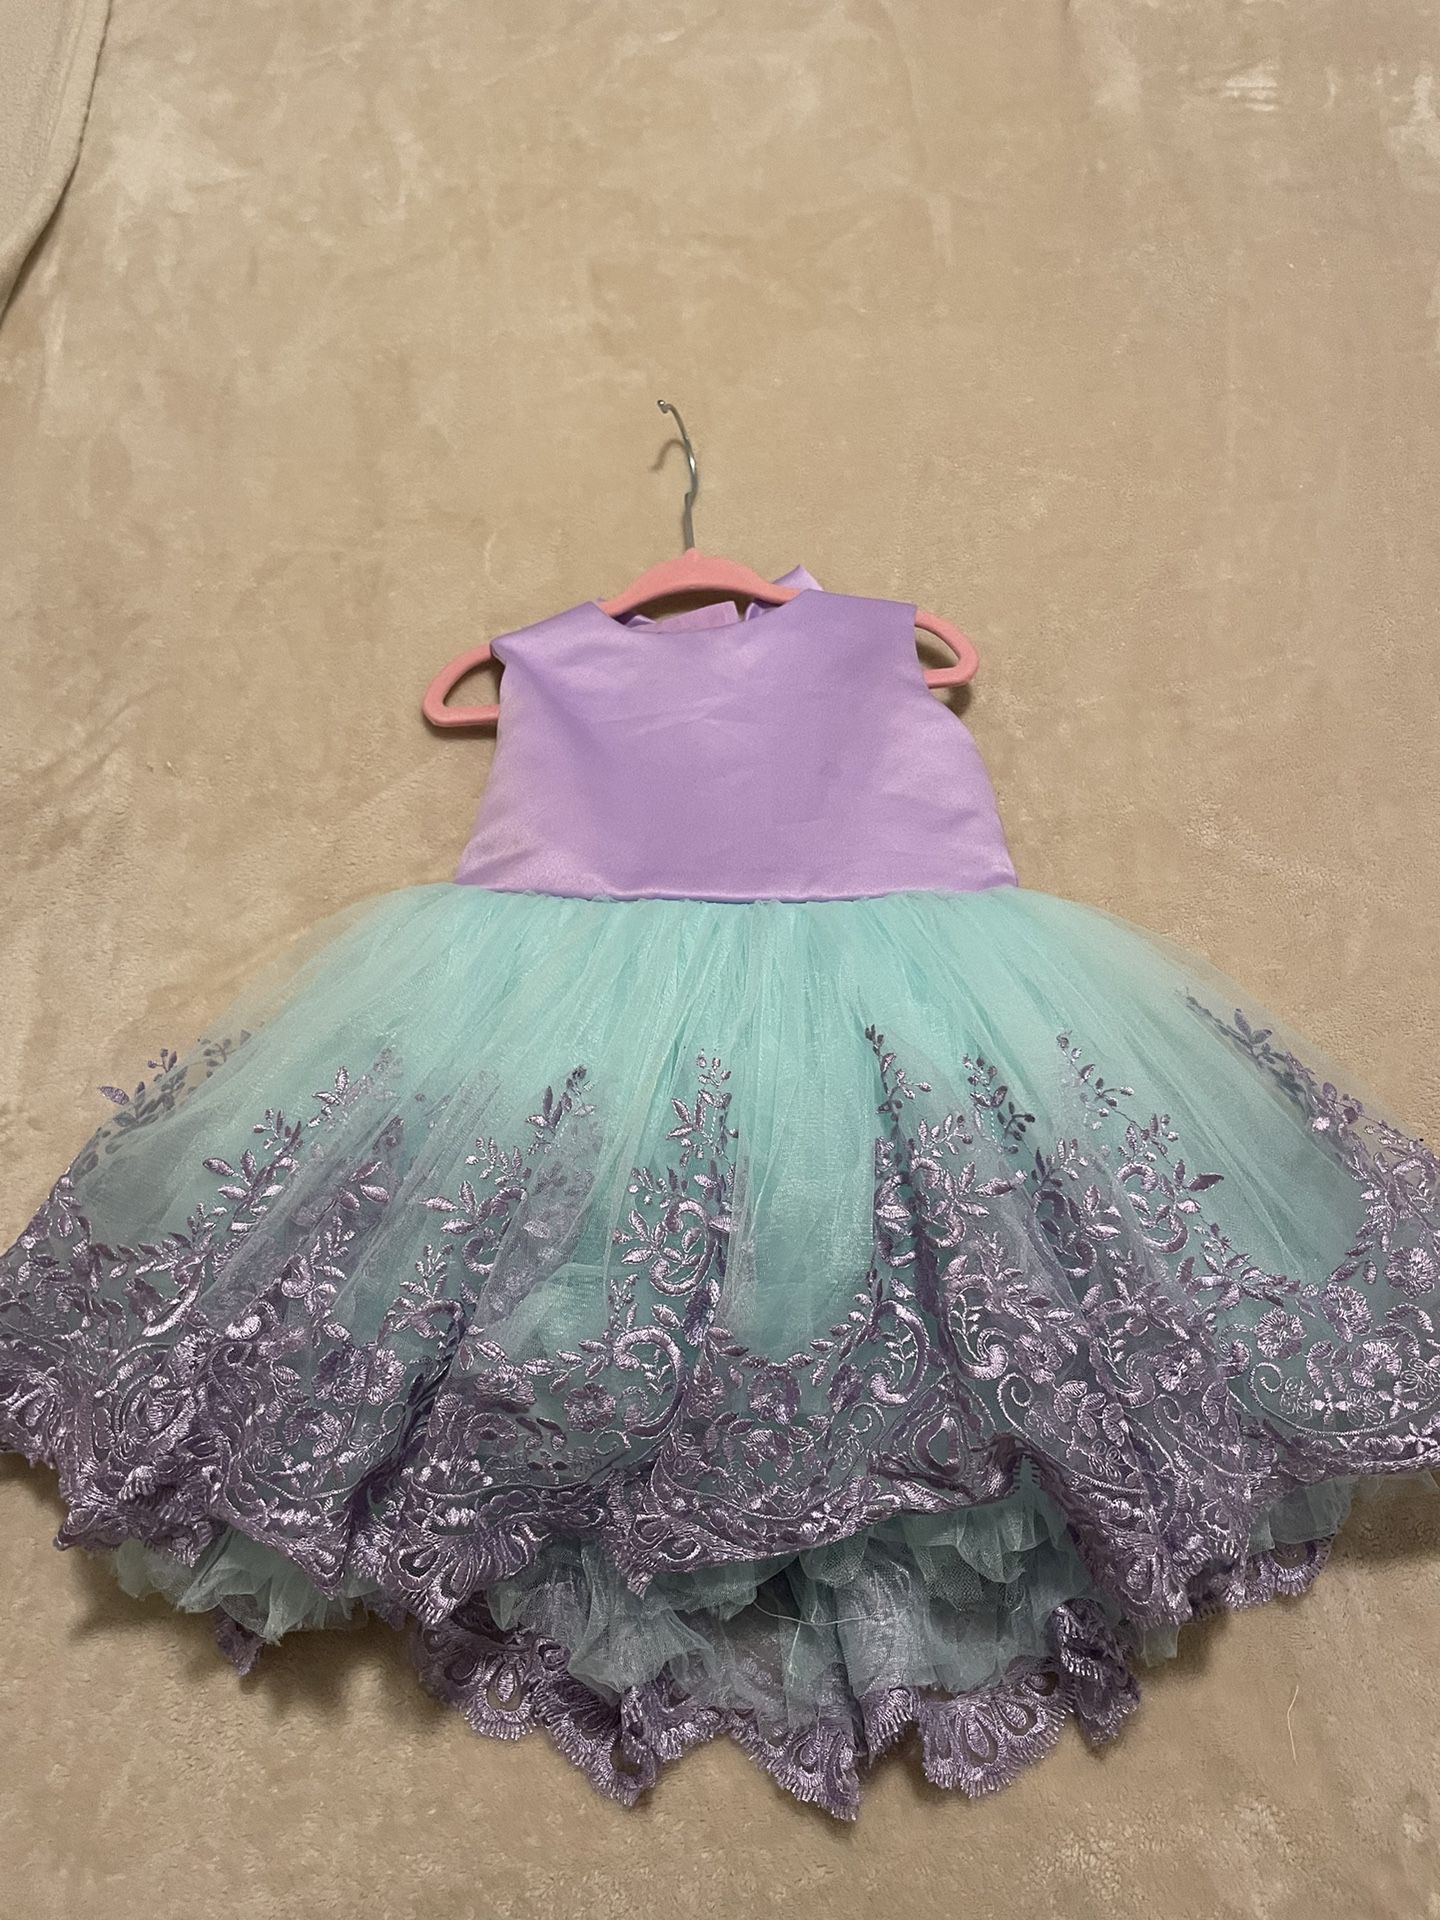 Itty bitty toes toddler dress 2 years 2T